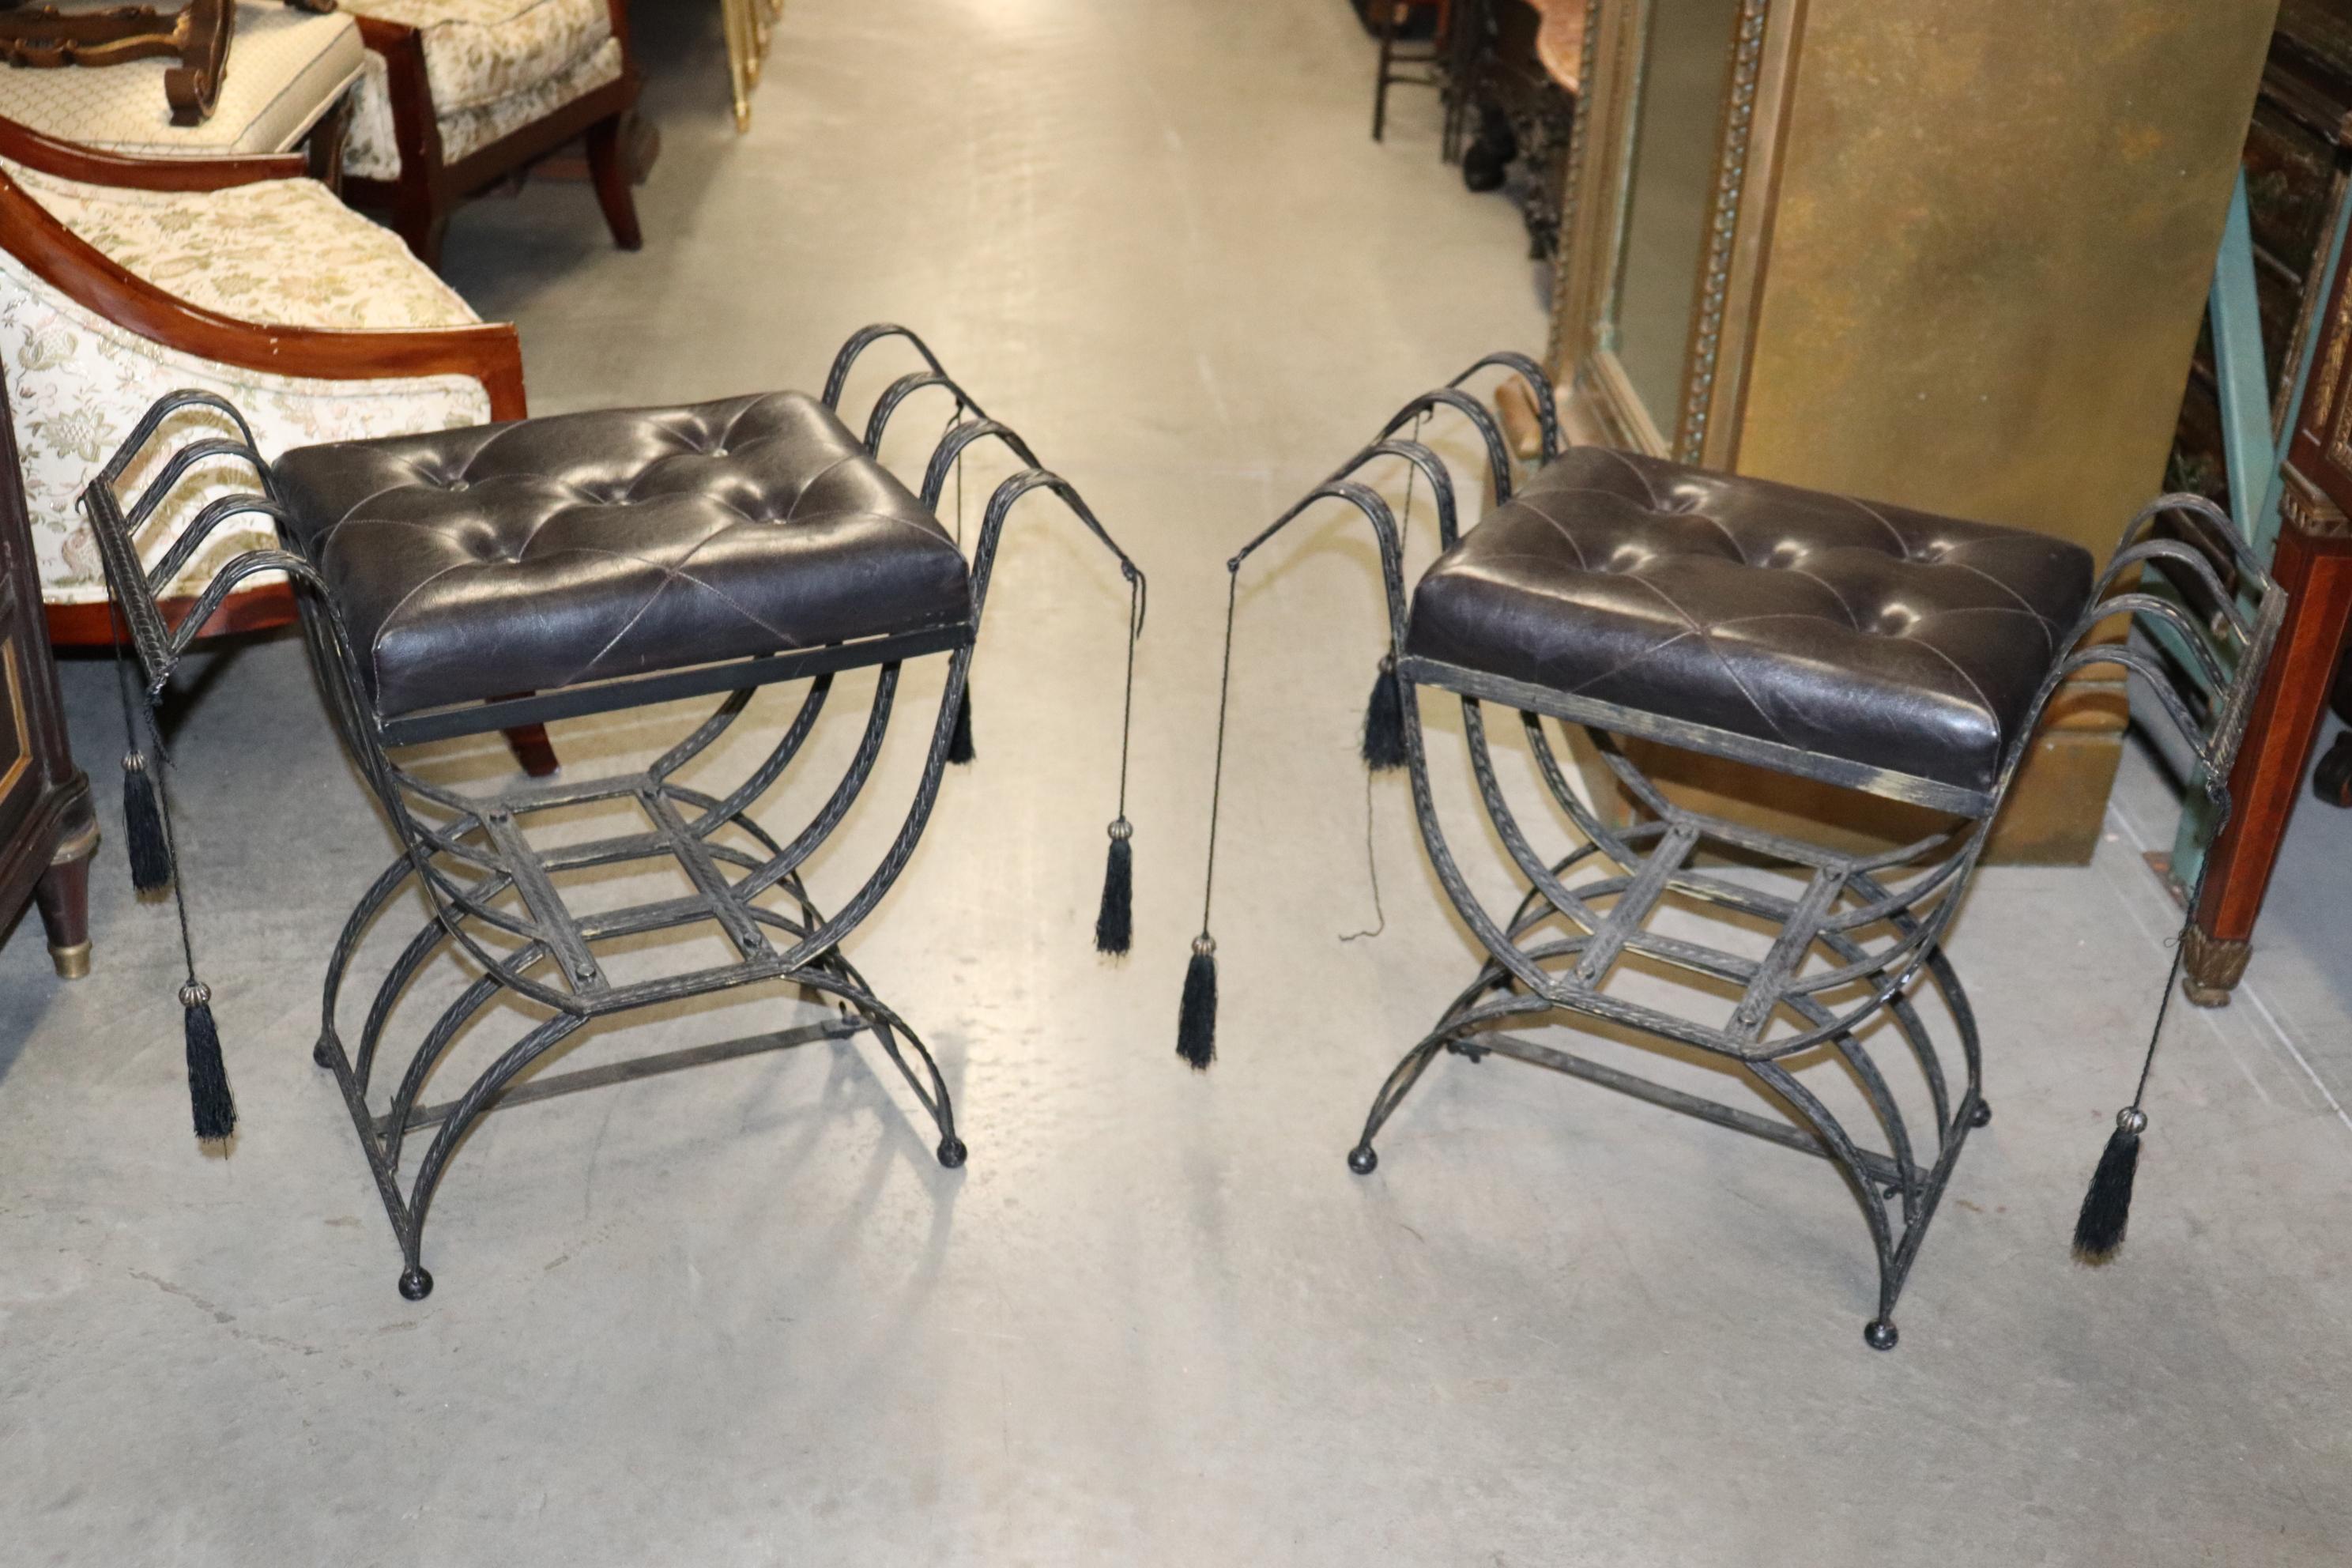 This is a beautiful pair of benches done in the Italian neoclassical style and in good condition. The benches have tassles and are very simple and decorative. They each measure 22 wide x 13.5 deep x 22 inches tall and the seat height is 20 inches